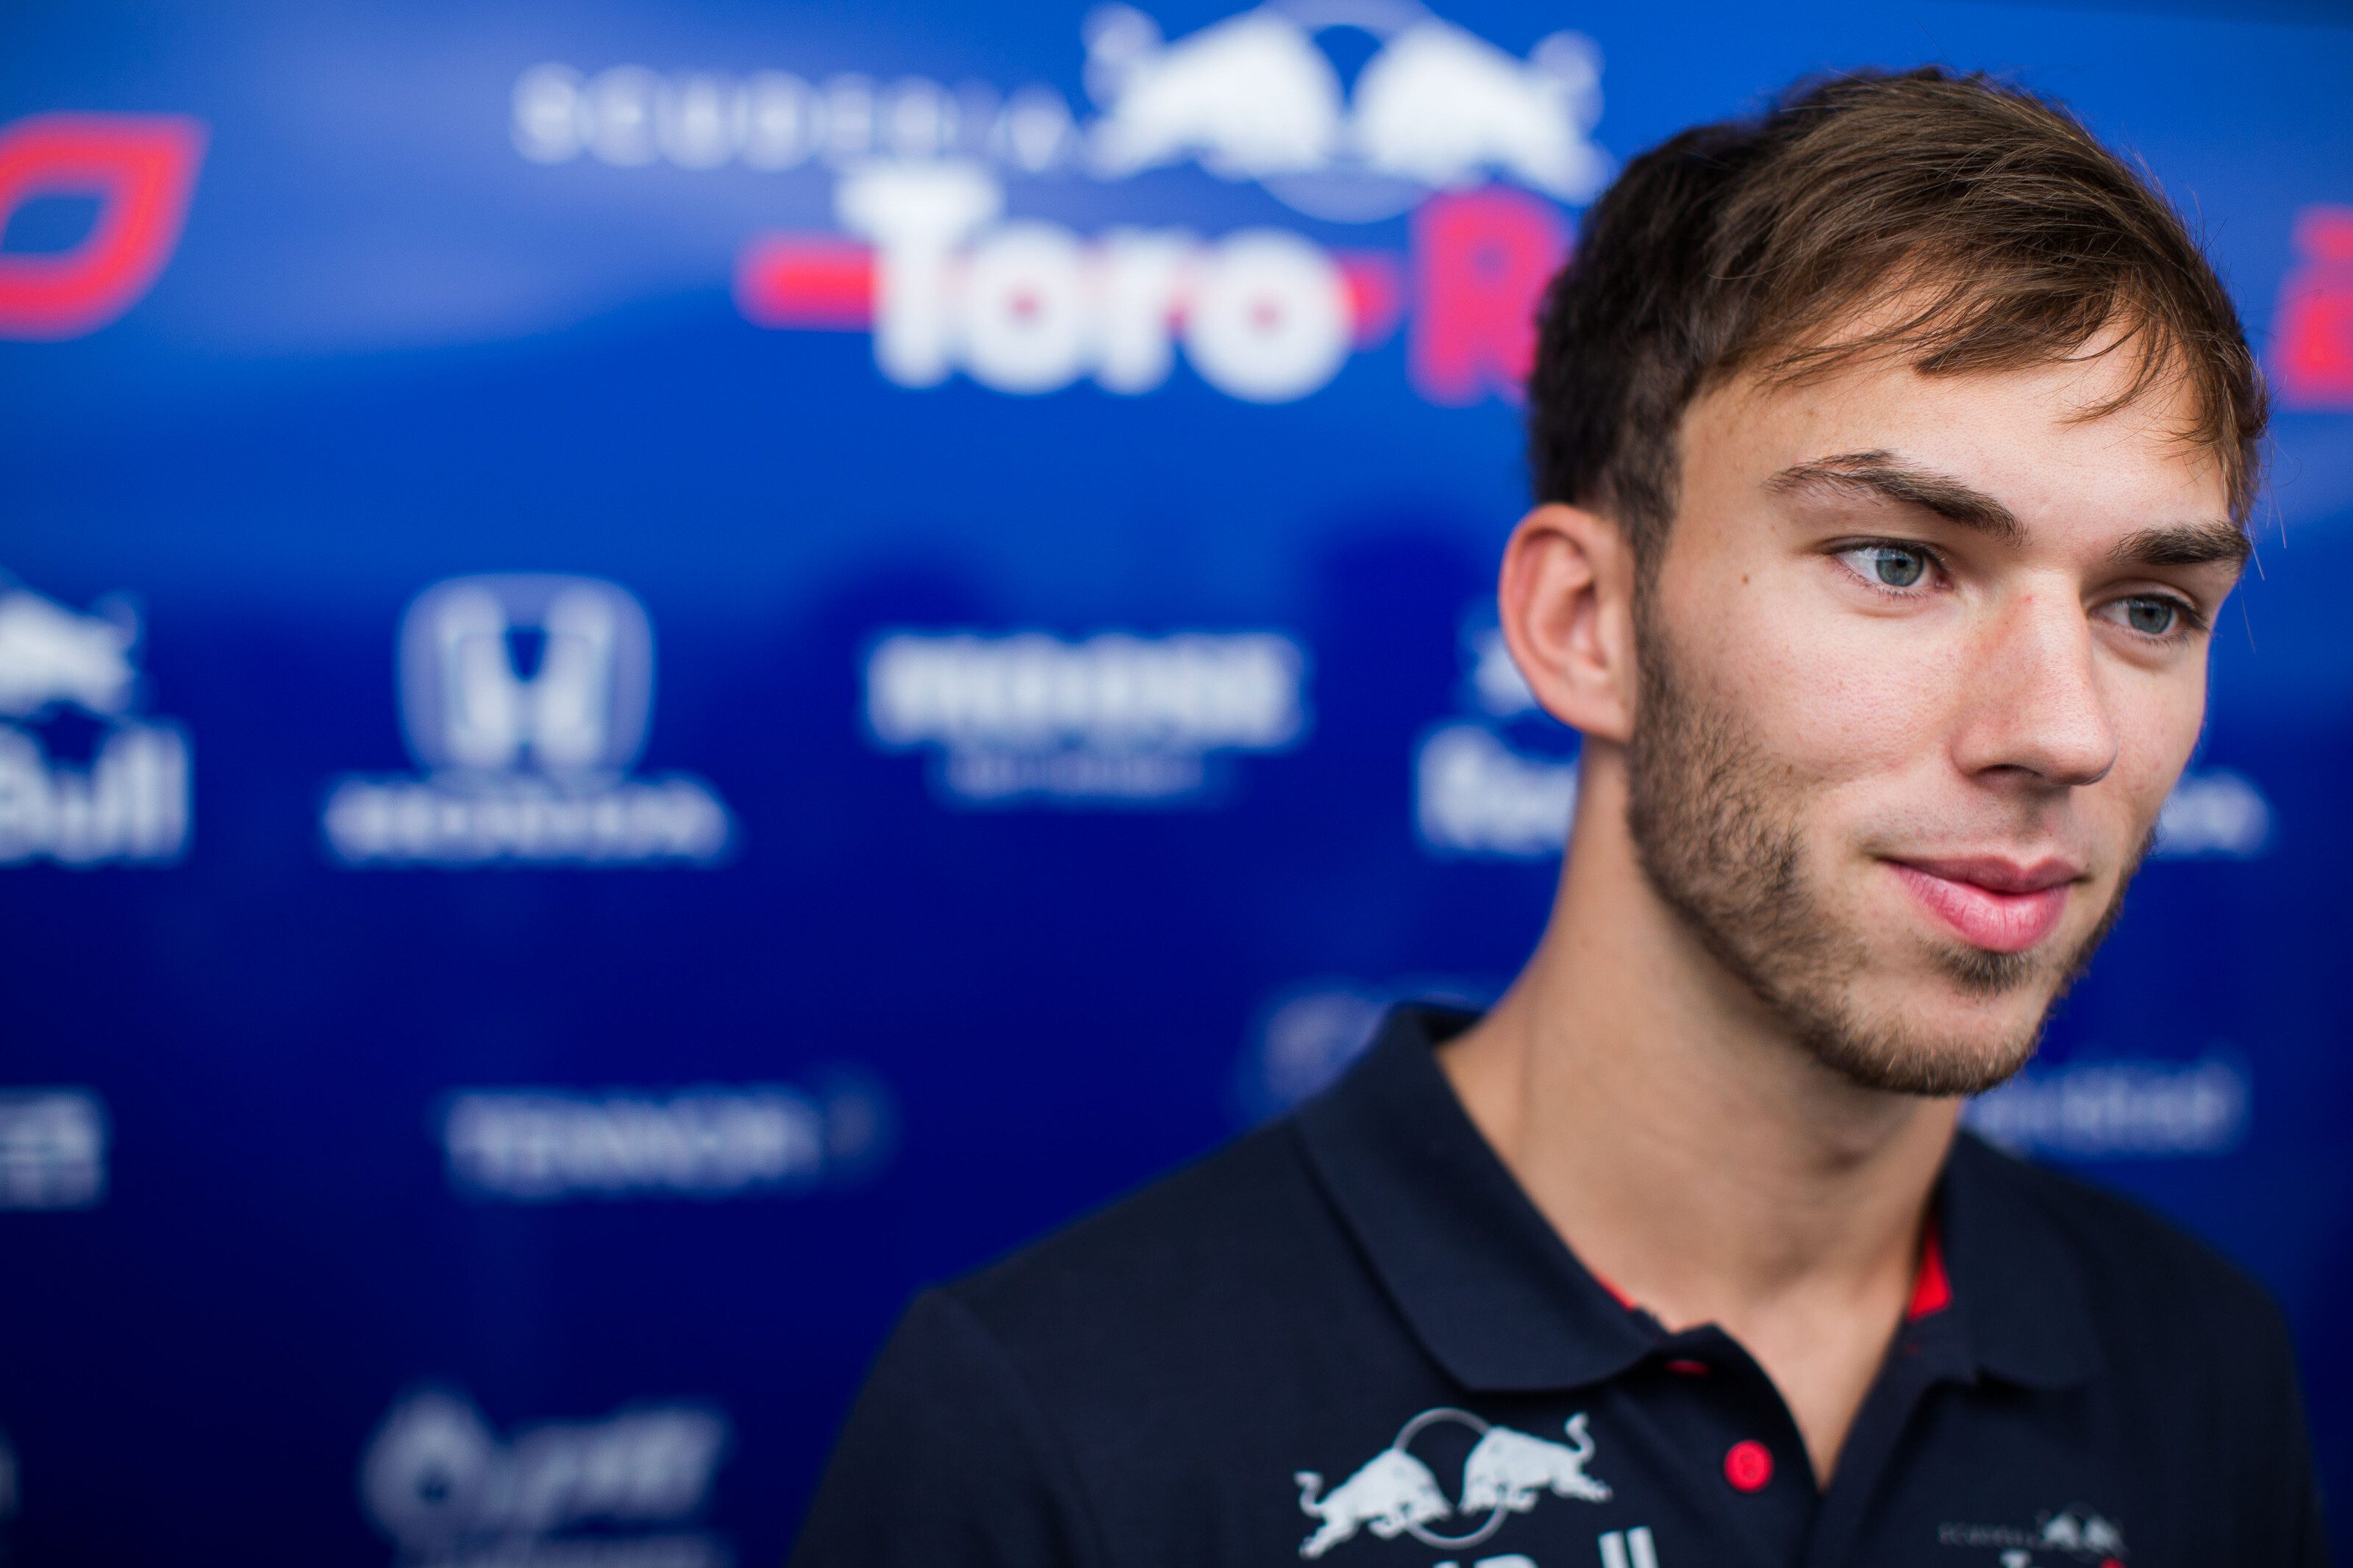 pierre gasly red bull toro rosso